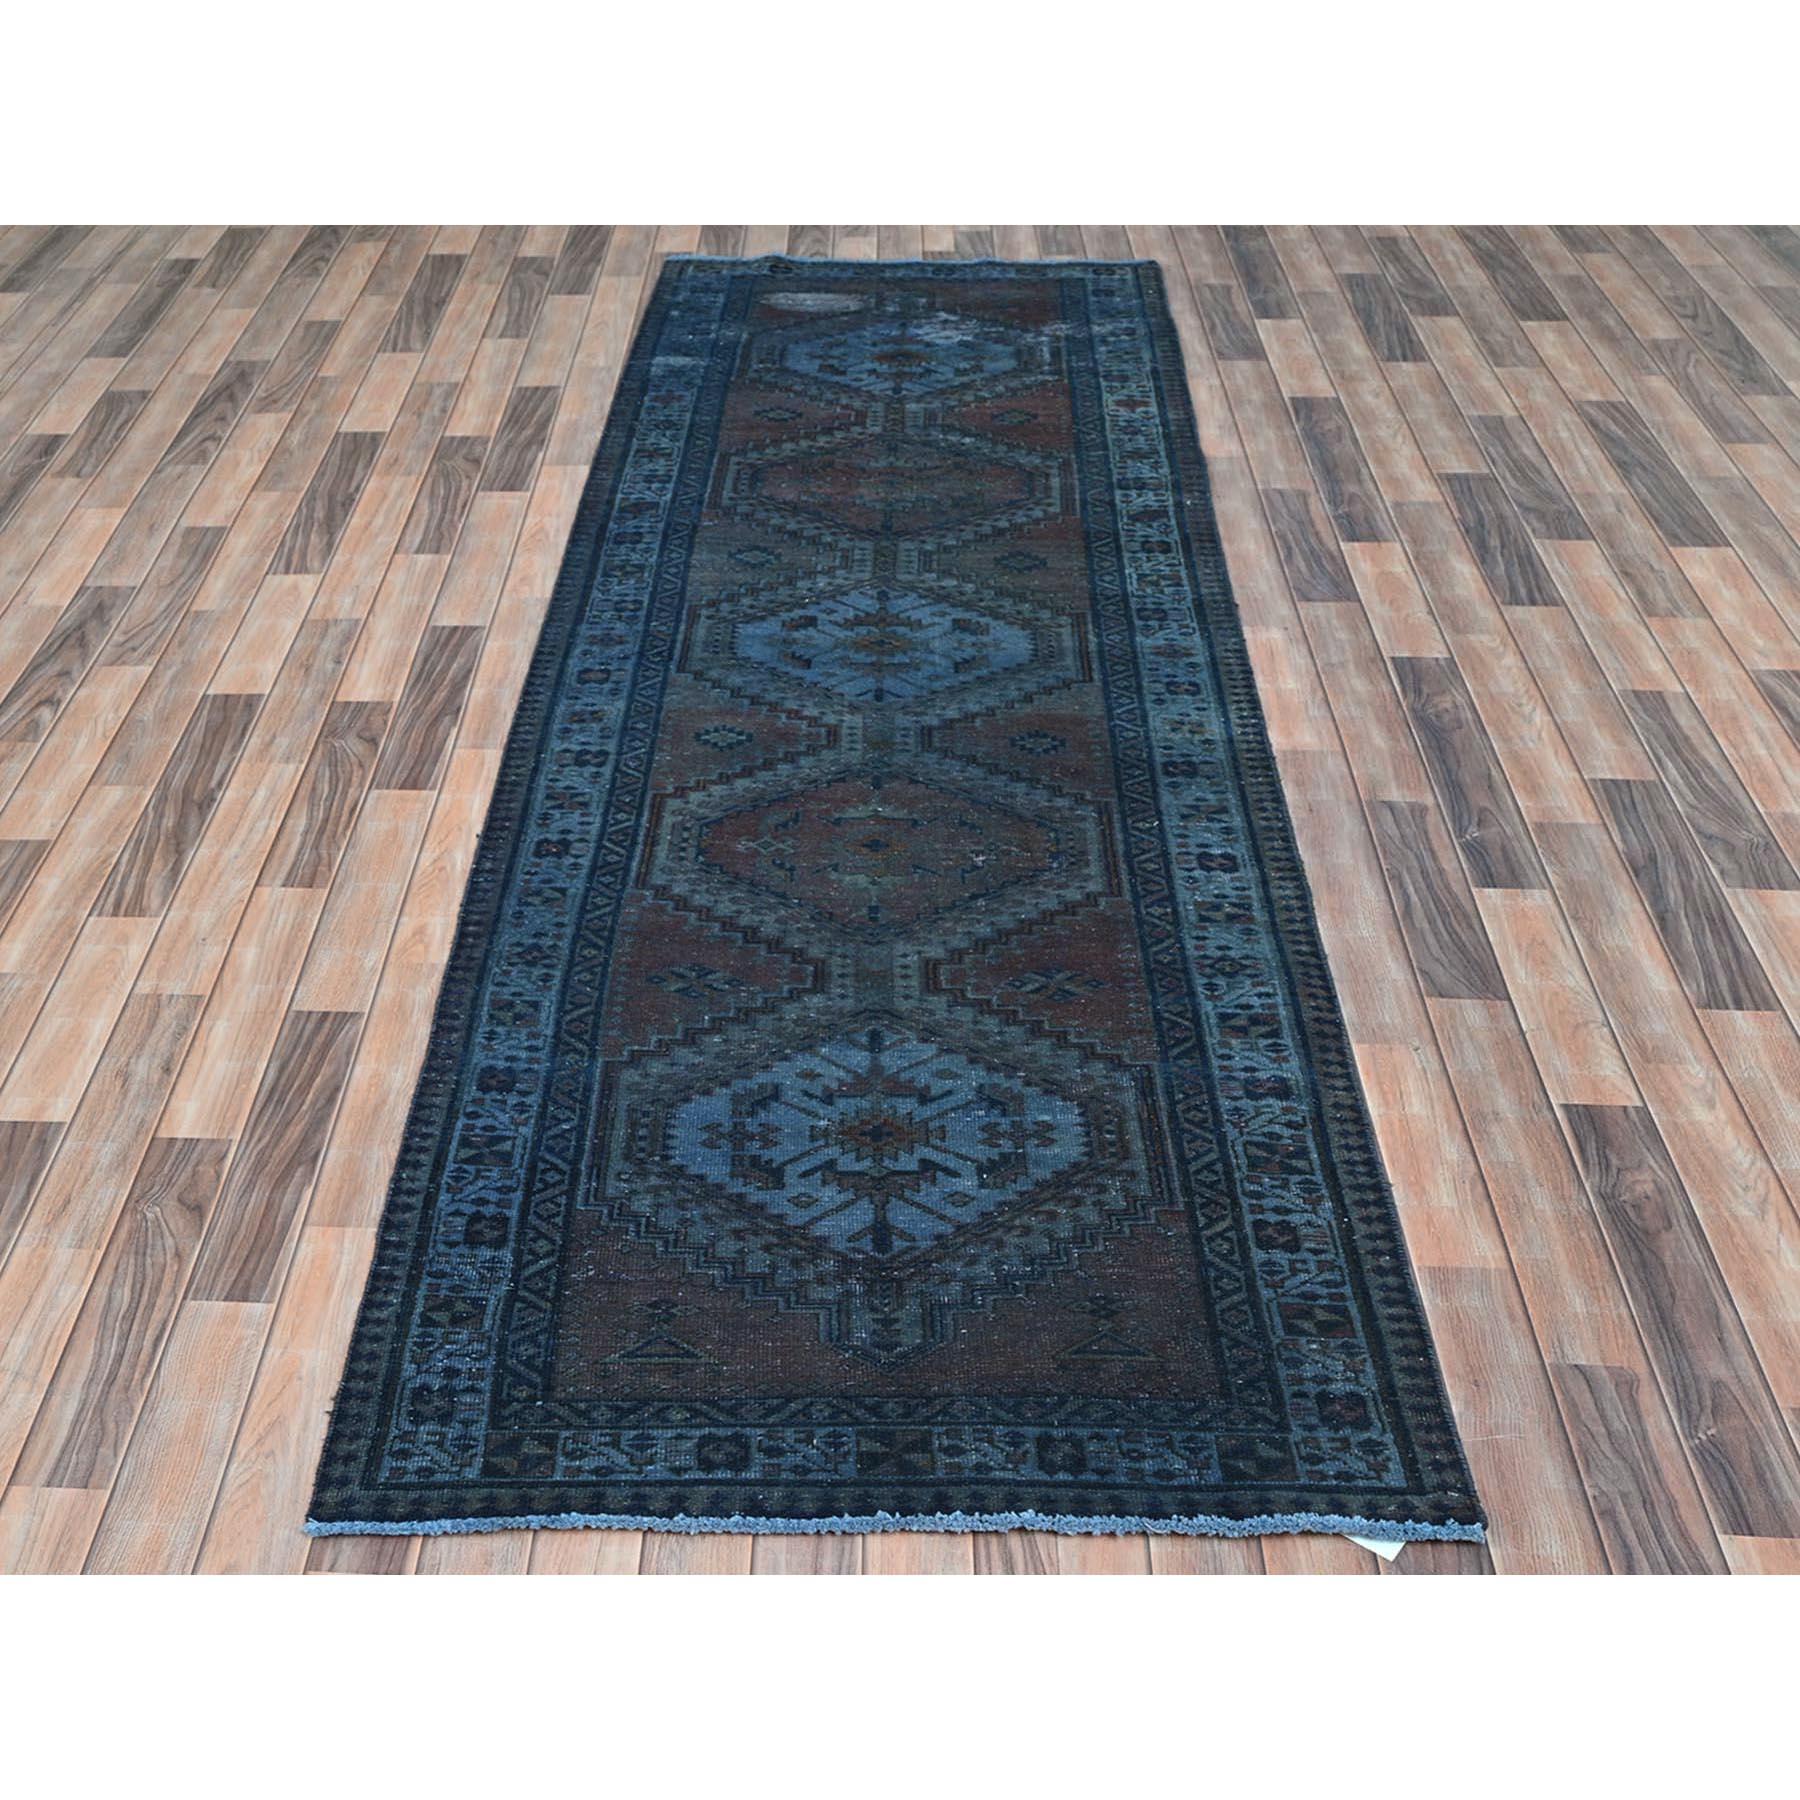 This fabulous hand-knotted carpet has been created and designed for extra strength and durability. This rug has been handcrafted for weeks in the traditional method that is used to make
Exact Rug Size in Feet and Inches : 3'5